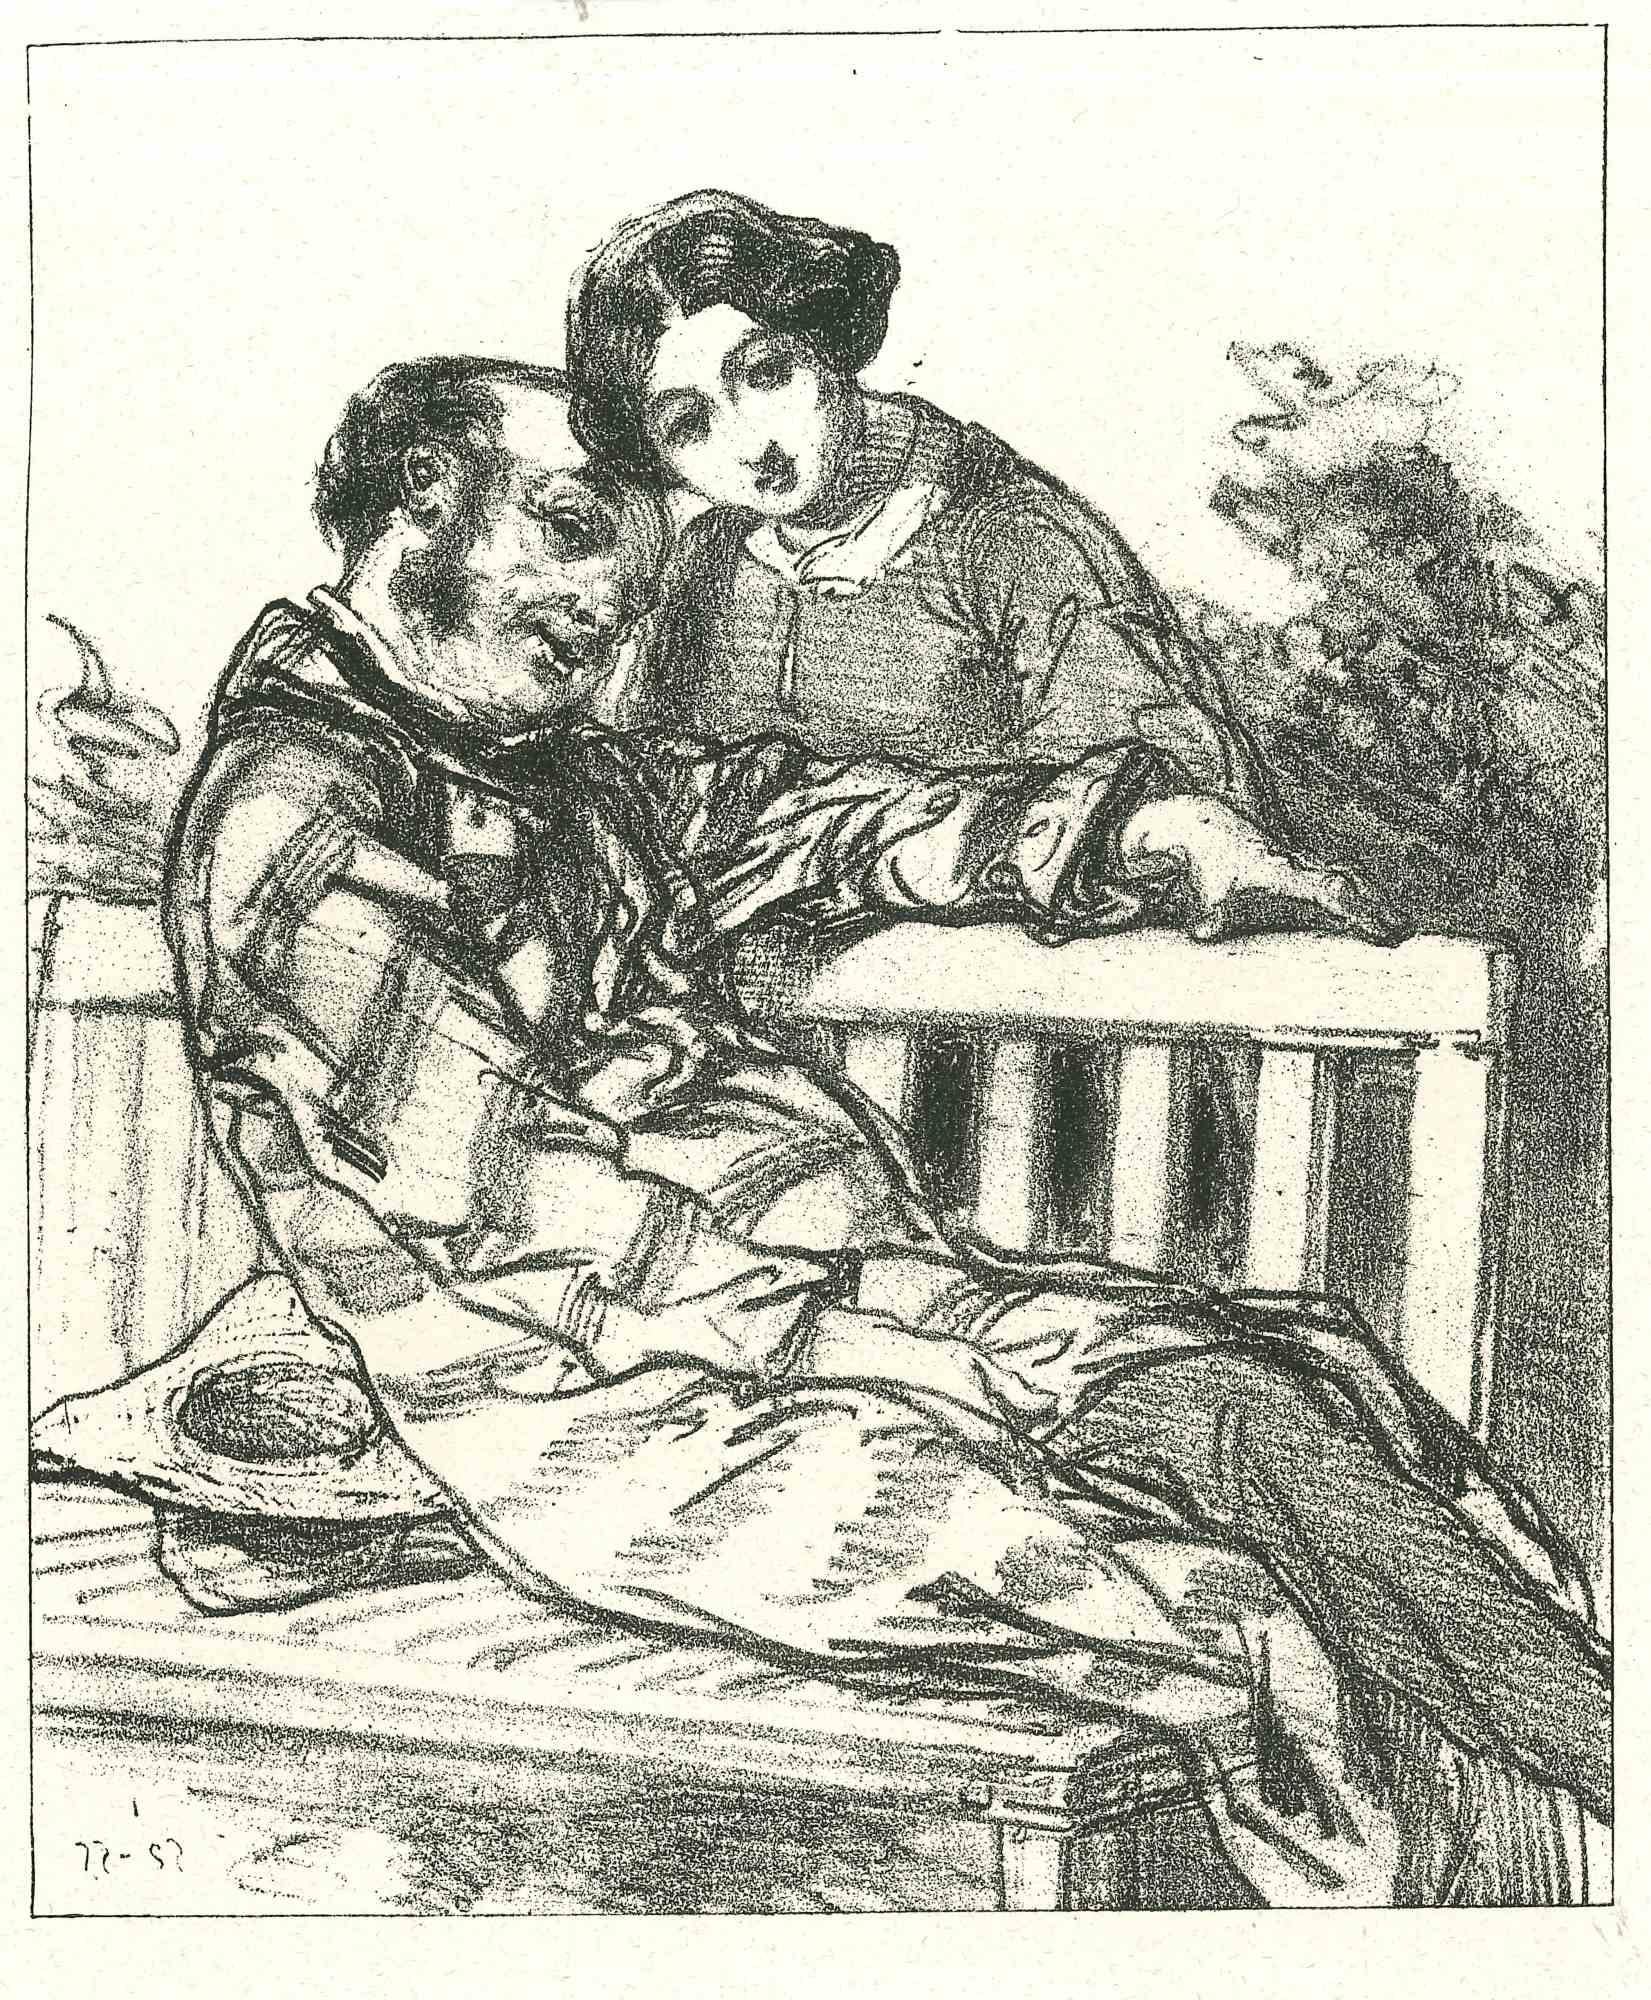 Gentle Fondness is an original lithograph artwork on ivory-colored paper, realized by the French draftsman Paul Gavarni (after) (alias Guillaume Sulpice Chevalier Gavarni, 1804-1866) in Paris, 1881, in the collection of Illustrations for "La